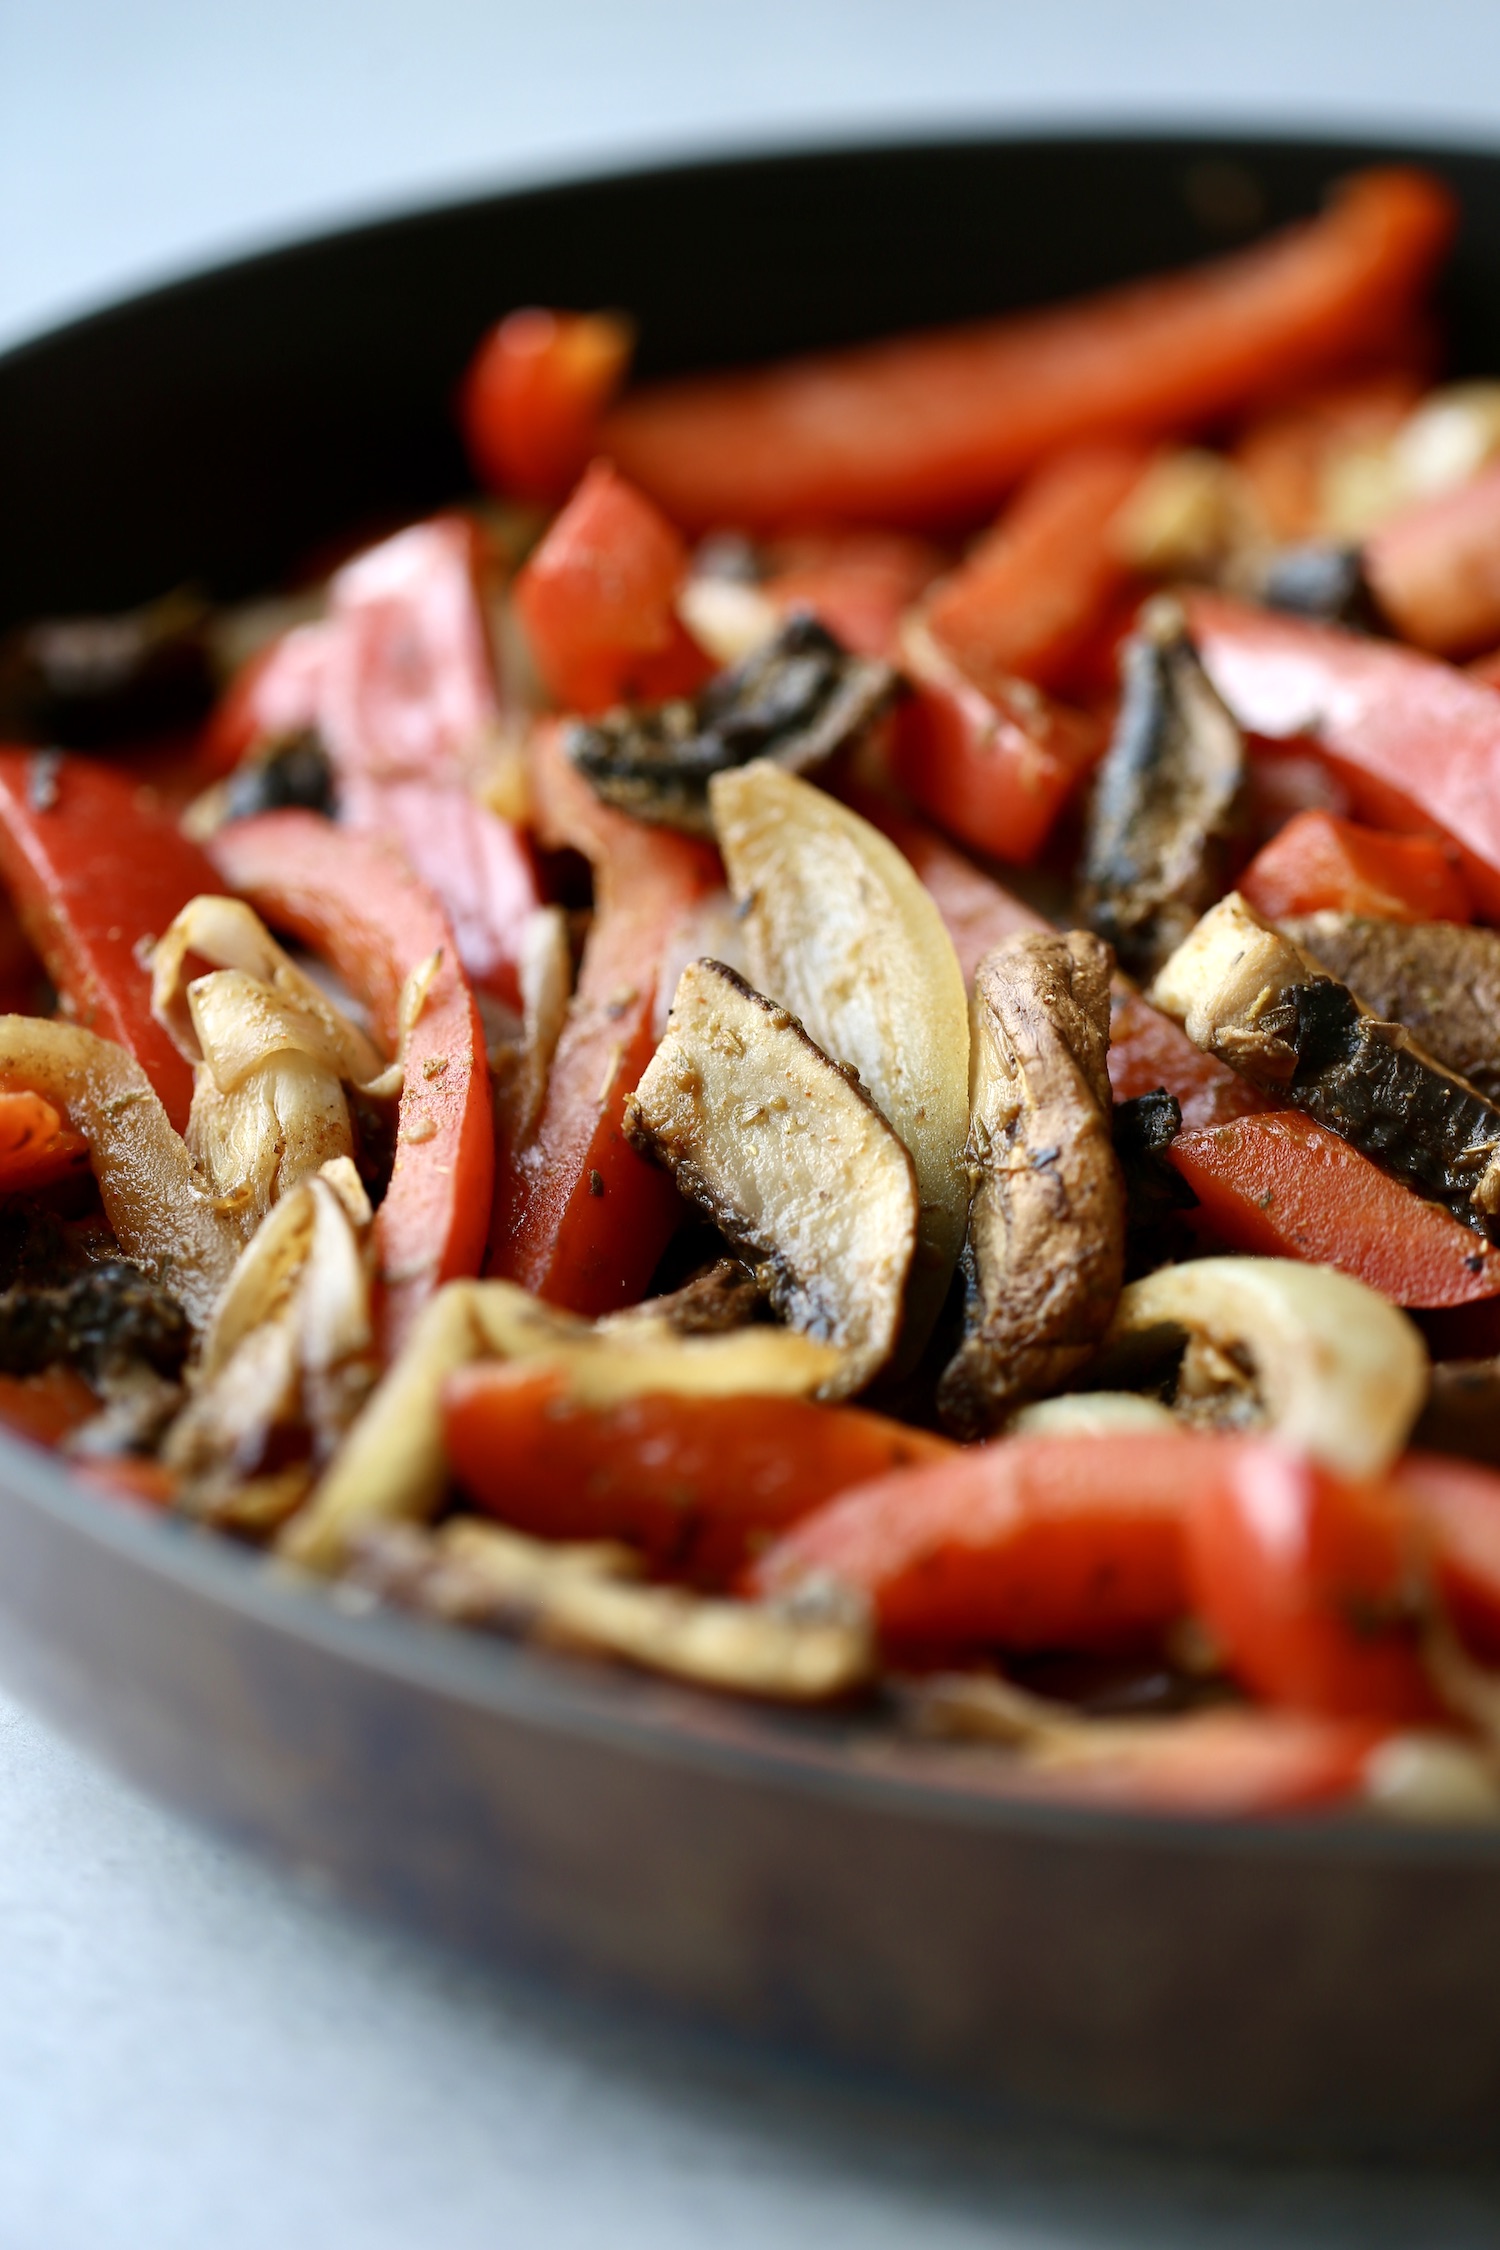 sauteed red bell peppers, mushrooms and onions in a skillet for vegan fajitas